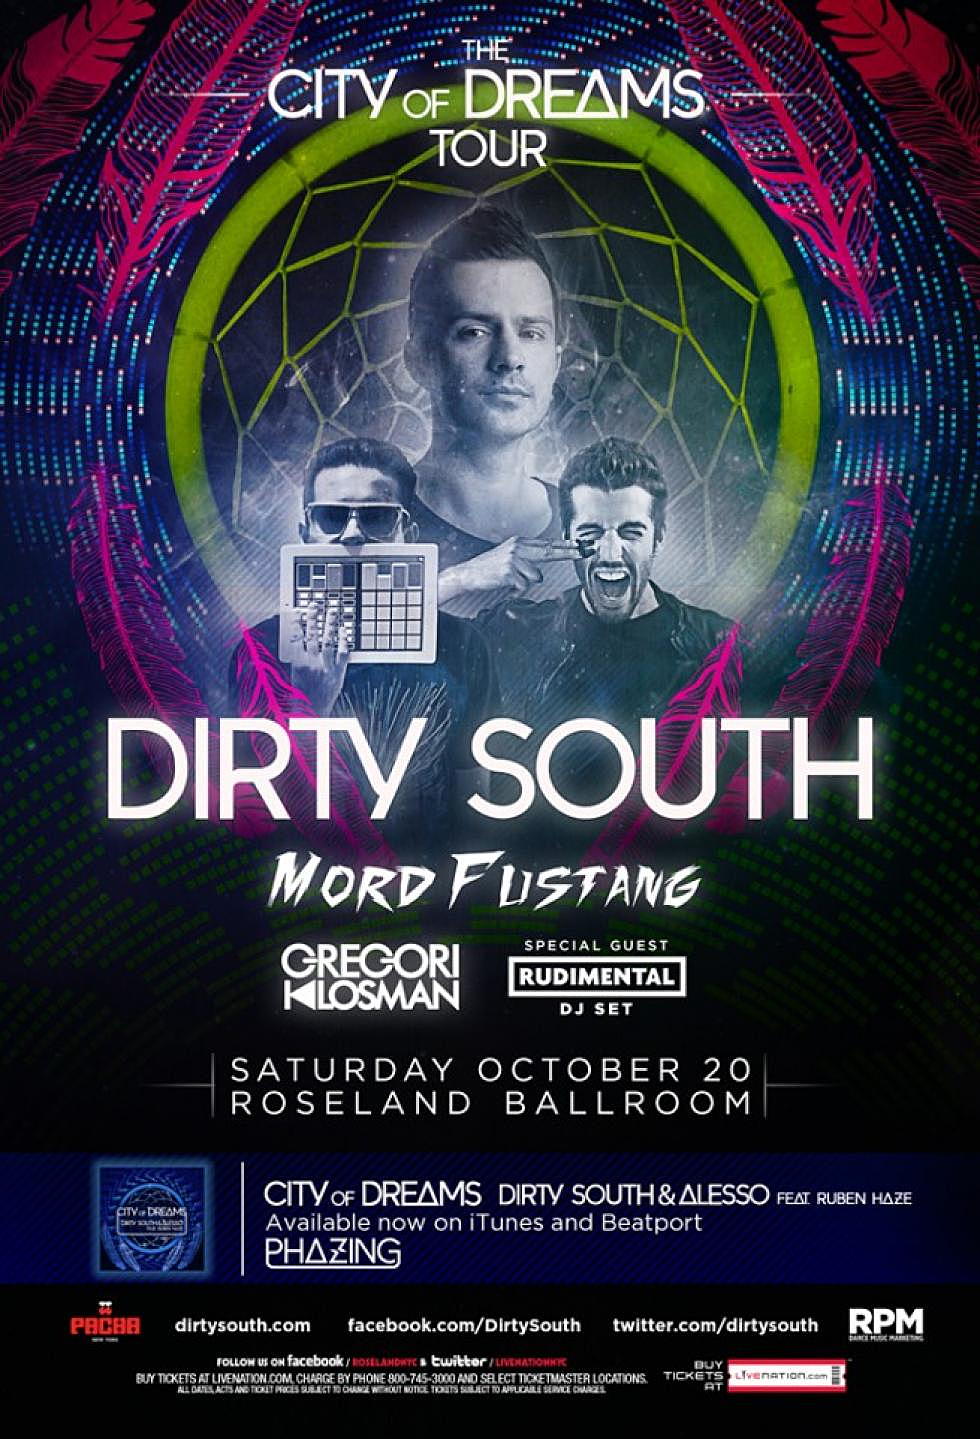 ELEKTRO EXCLUSIVE: The City Of Dreams Tour w/ Dirty South Full Lineup Revealed for Roseland Ballroom show on October 20th